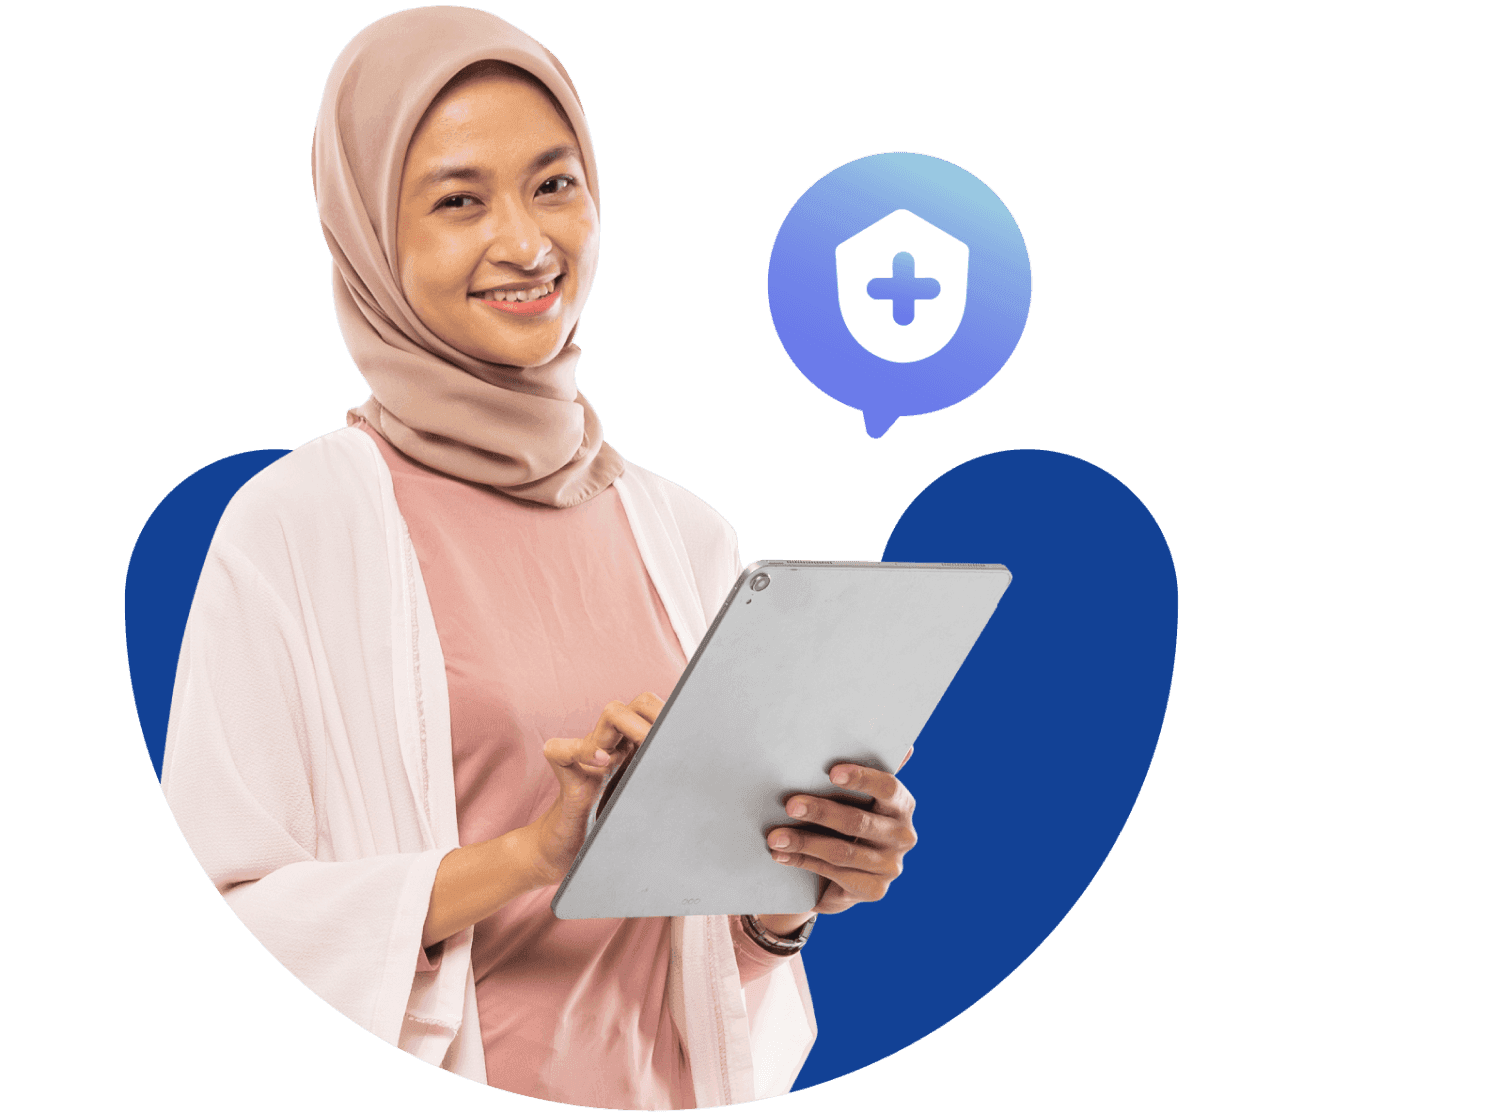 ReySaldo provides flexible employee health insurance premiums according to your business needs. Provide complete health protection starting from IDR 150,000 per month.